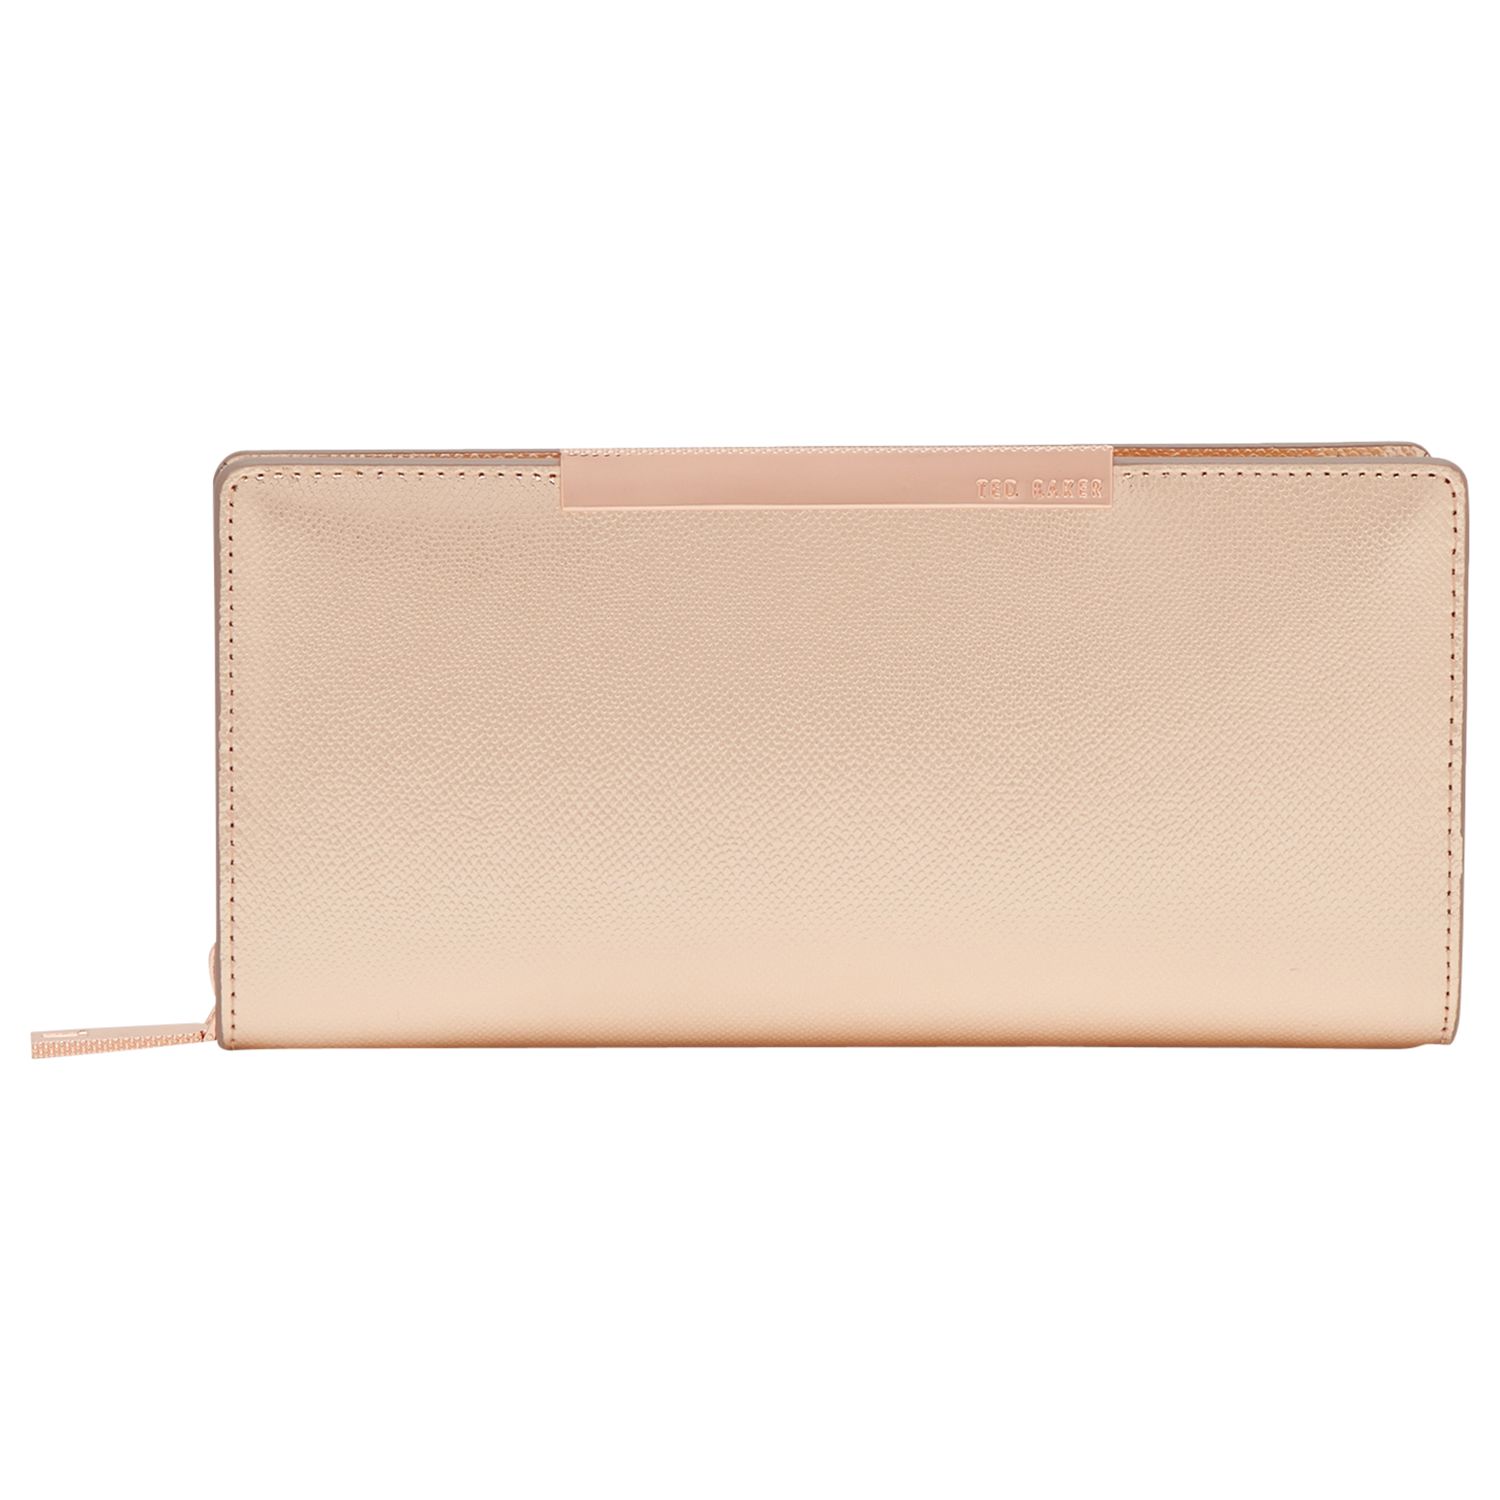 Ted Baker Darrah Leather Matinee Purse